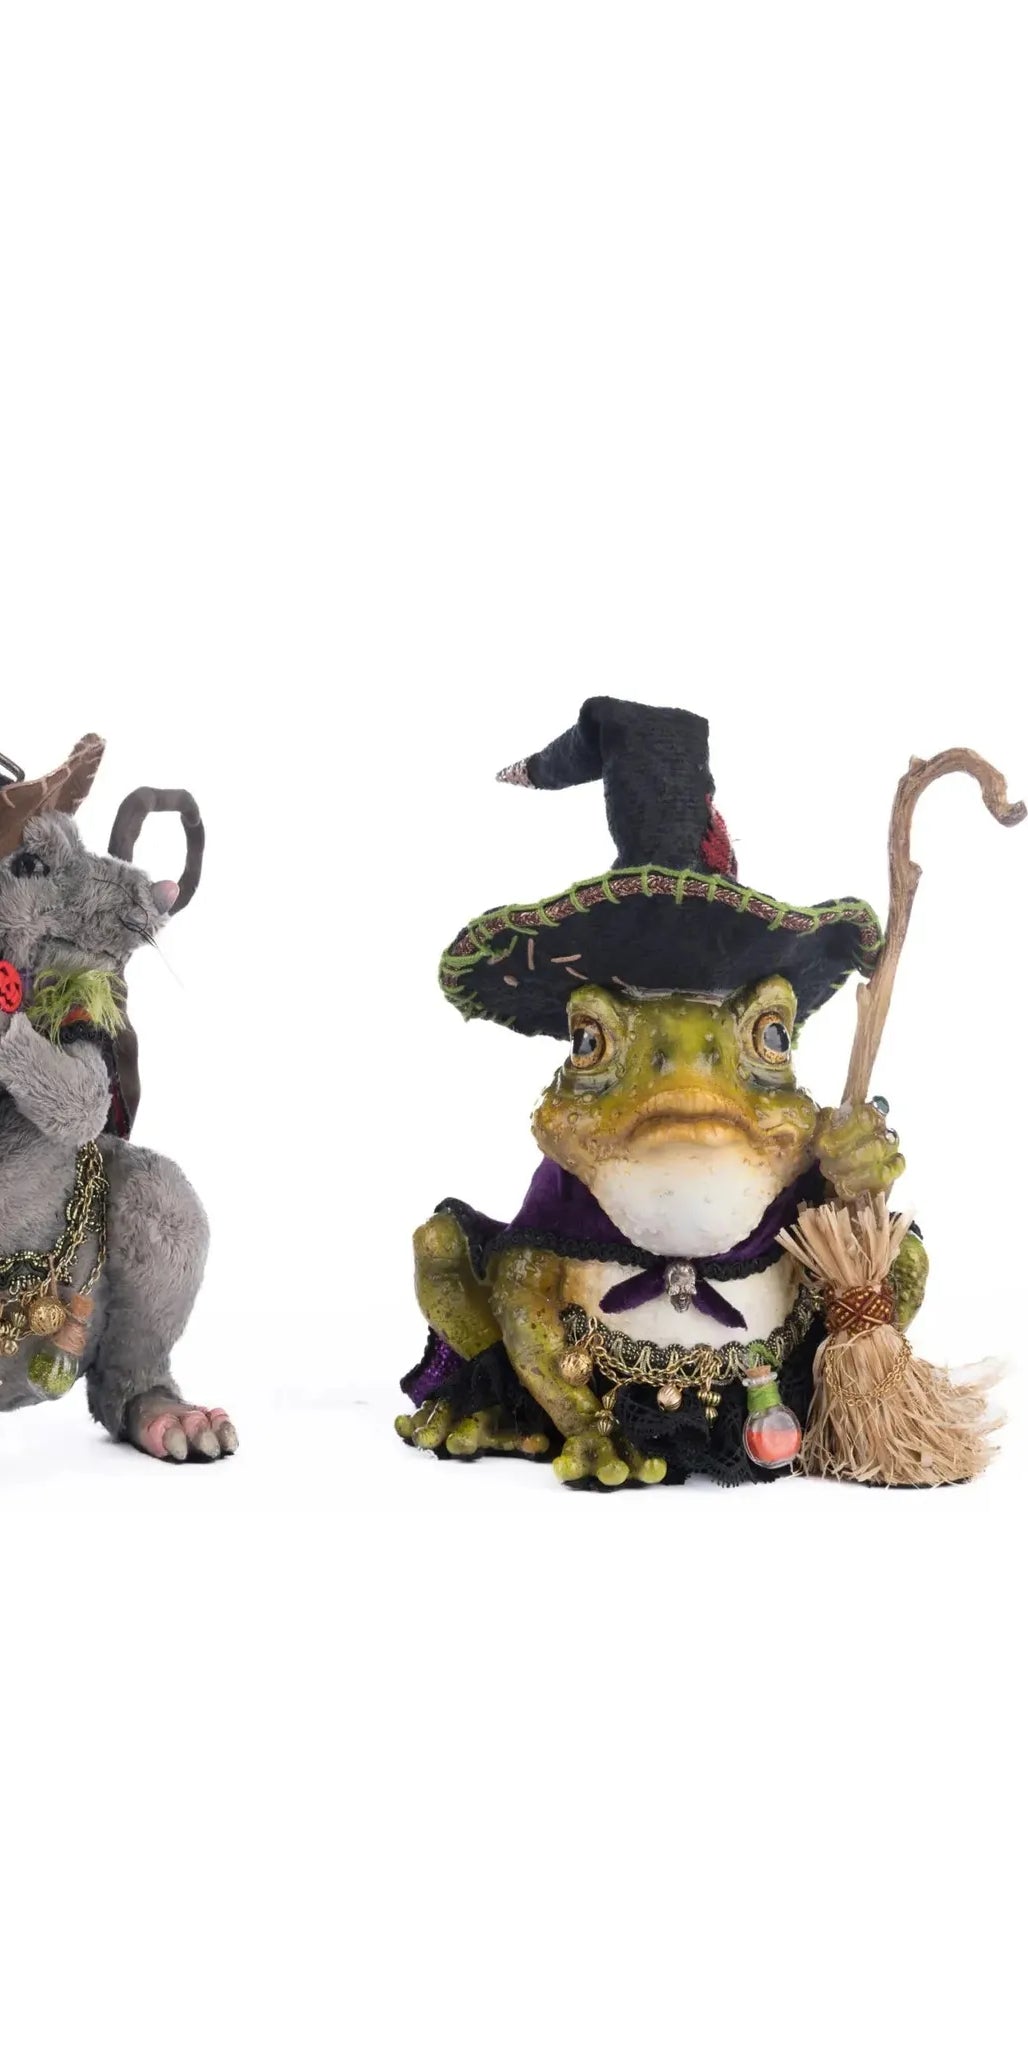 Rat And Frog Witches Assortment of 2 - Michelle's aDOORable Creations - Halloween Decor